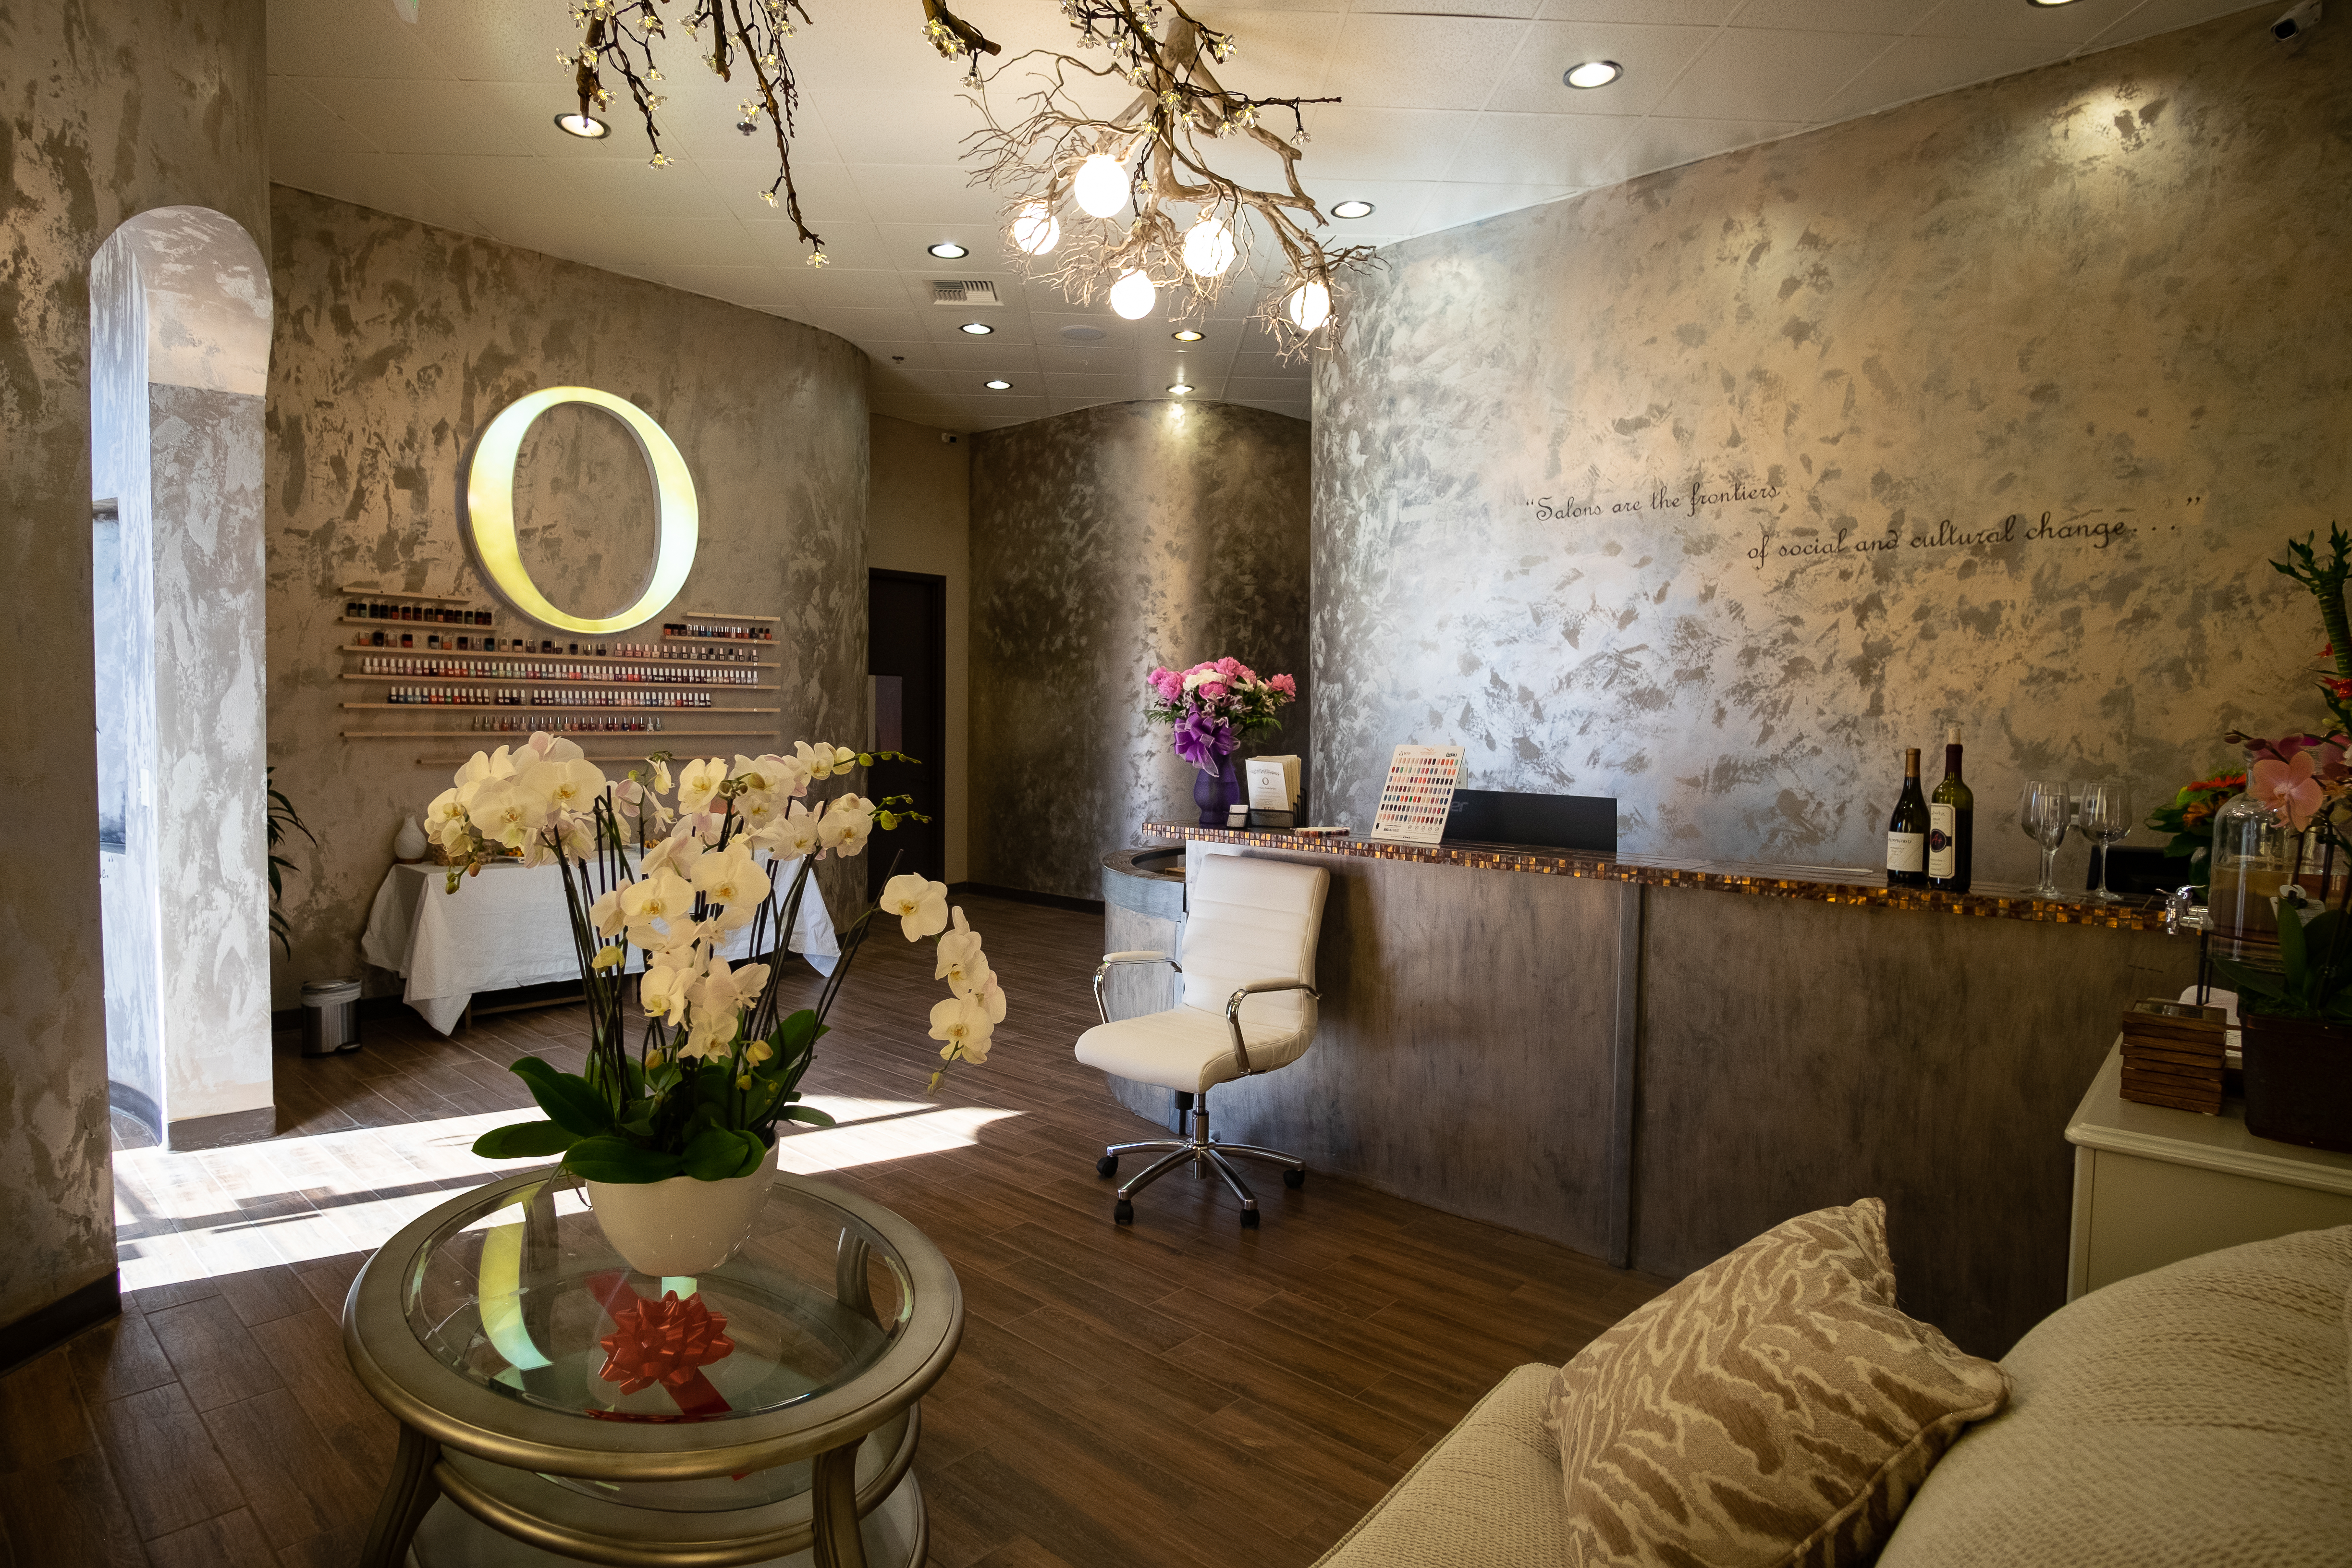 Gallery Collection - Natural Nails Spa - Nail salon in Oxford Square on  Grand St Paul, MN 55105